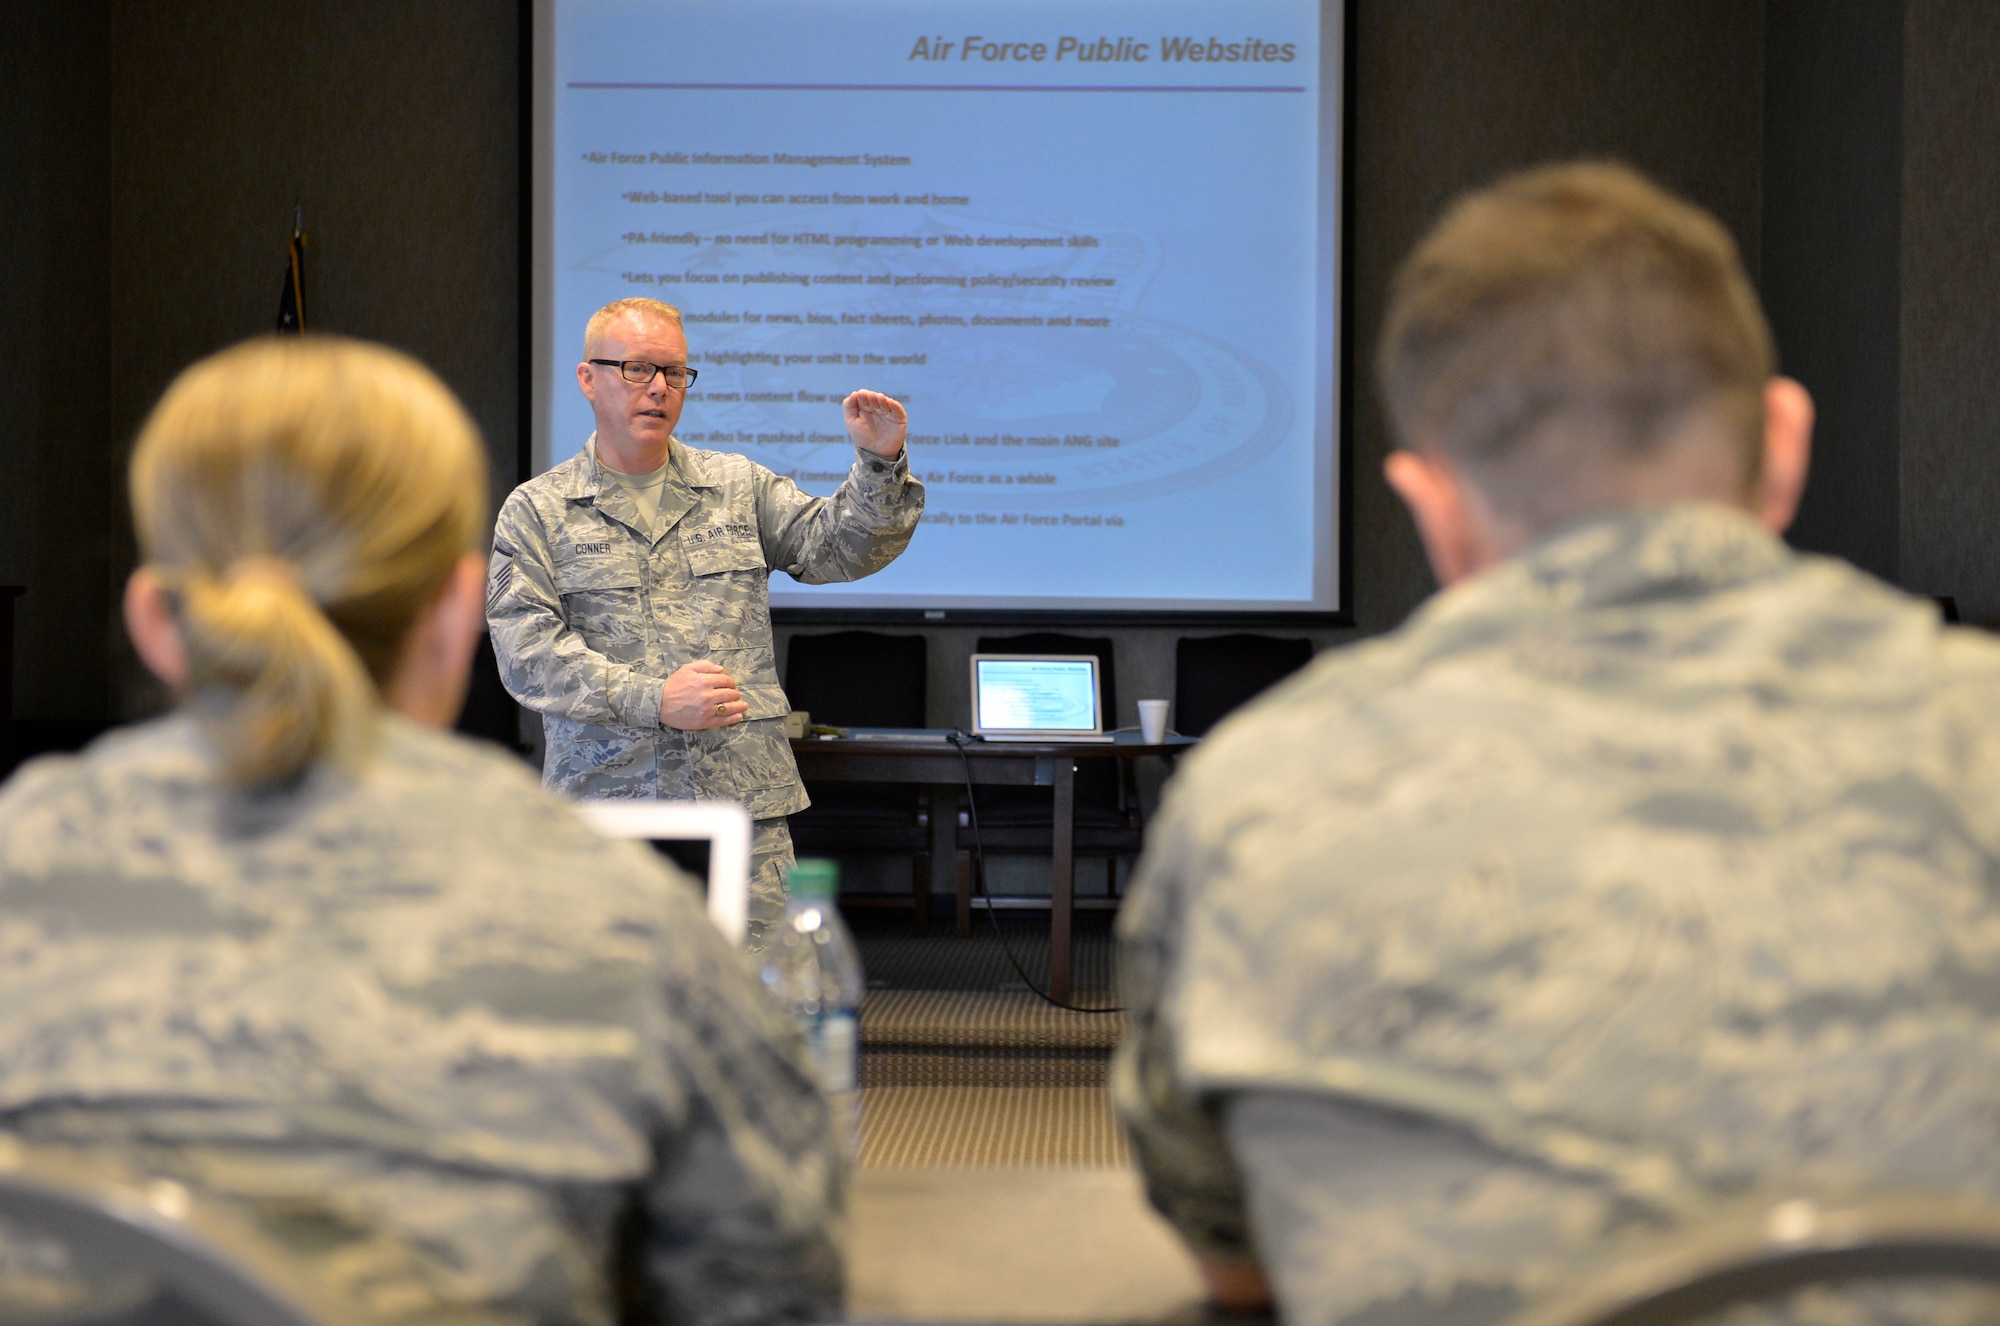 MCGHEE TYSON AIR NATIONAL GUARD BASE, Tenn. – Master Sgt. Bill Conner, a public affairs training manager at the I.G. Brown Training and Education Center, speaks with Air National Guard public affairs personnel here July 12, 2013, about the Air Force Public Information Management System during the TEC’s Public Affairs Managers Course. (U.S. Air National Guard photo by Master Sgt. Kurt Skoglund/Released)